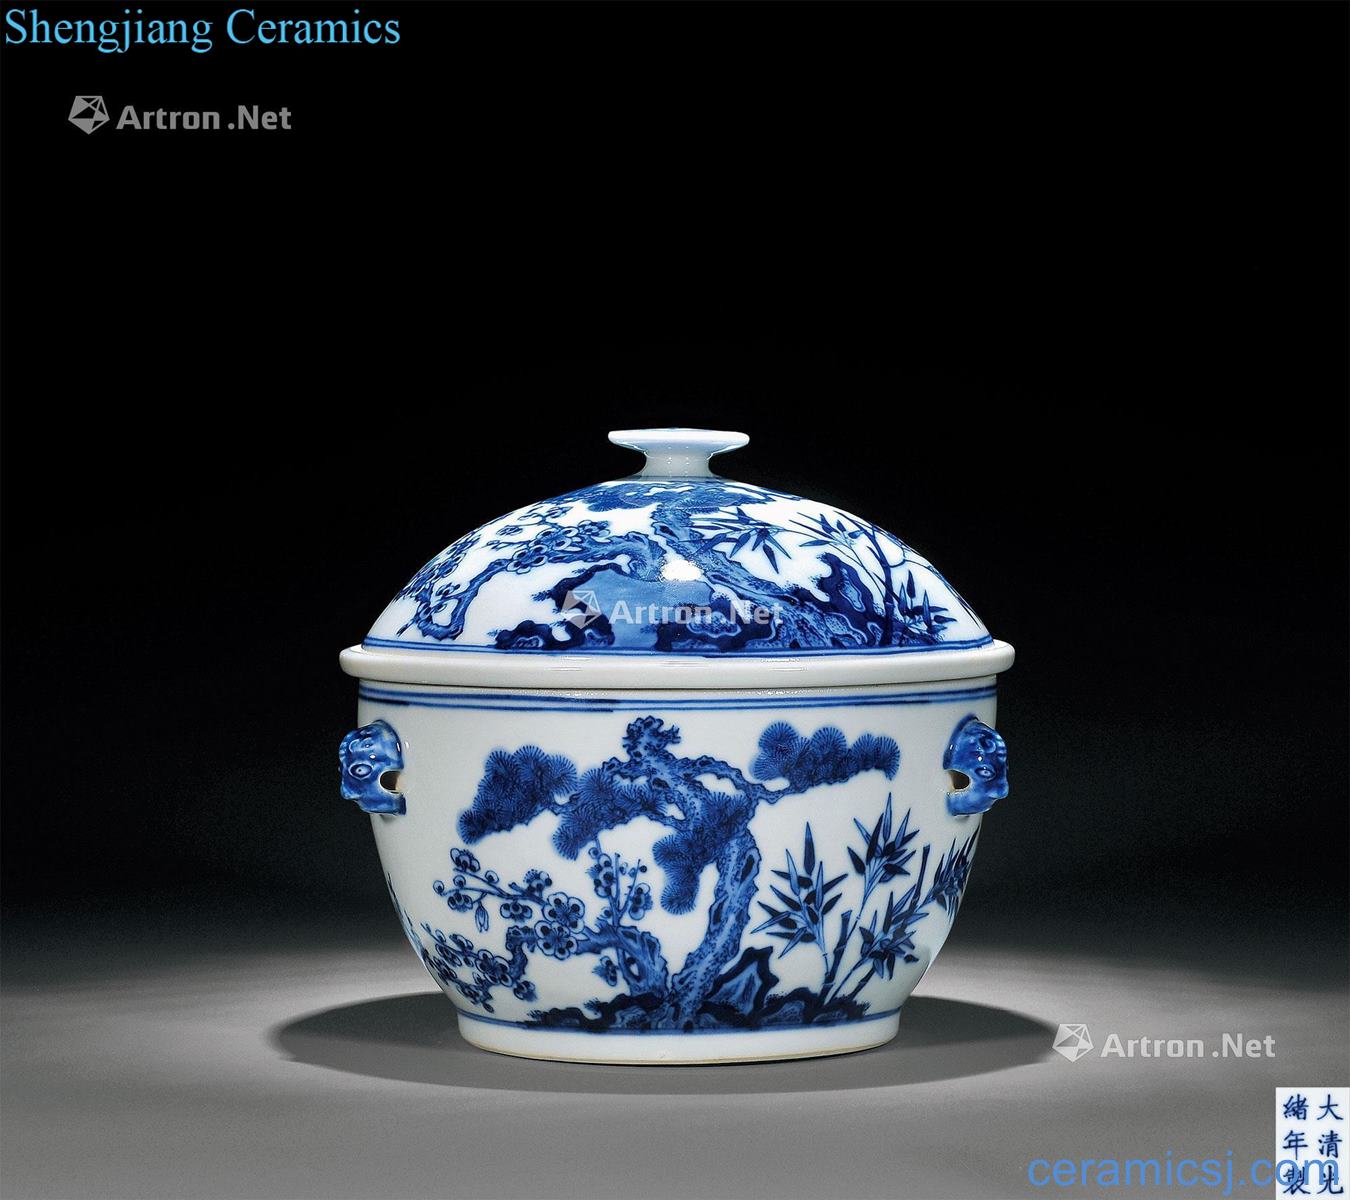 Qing guangxu Blue and white, poetic figure to offer them warm